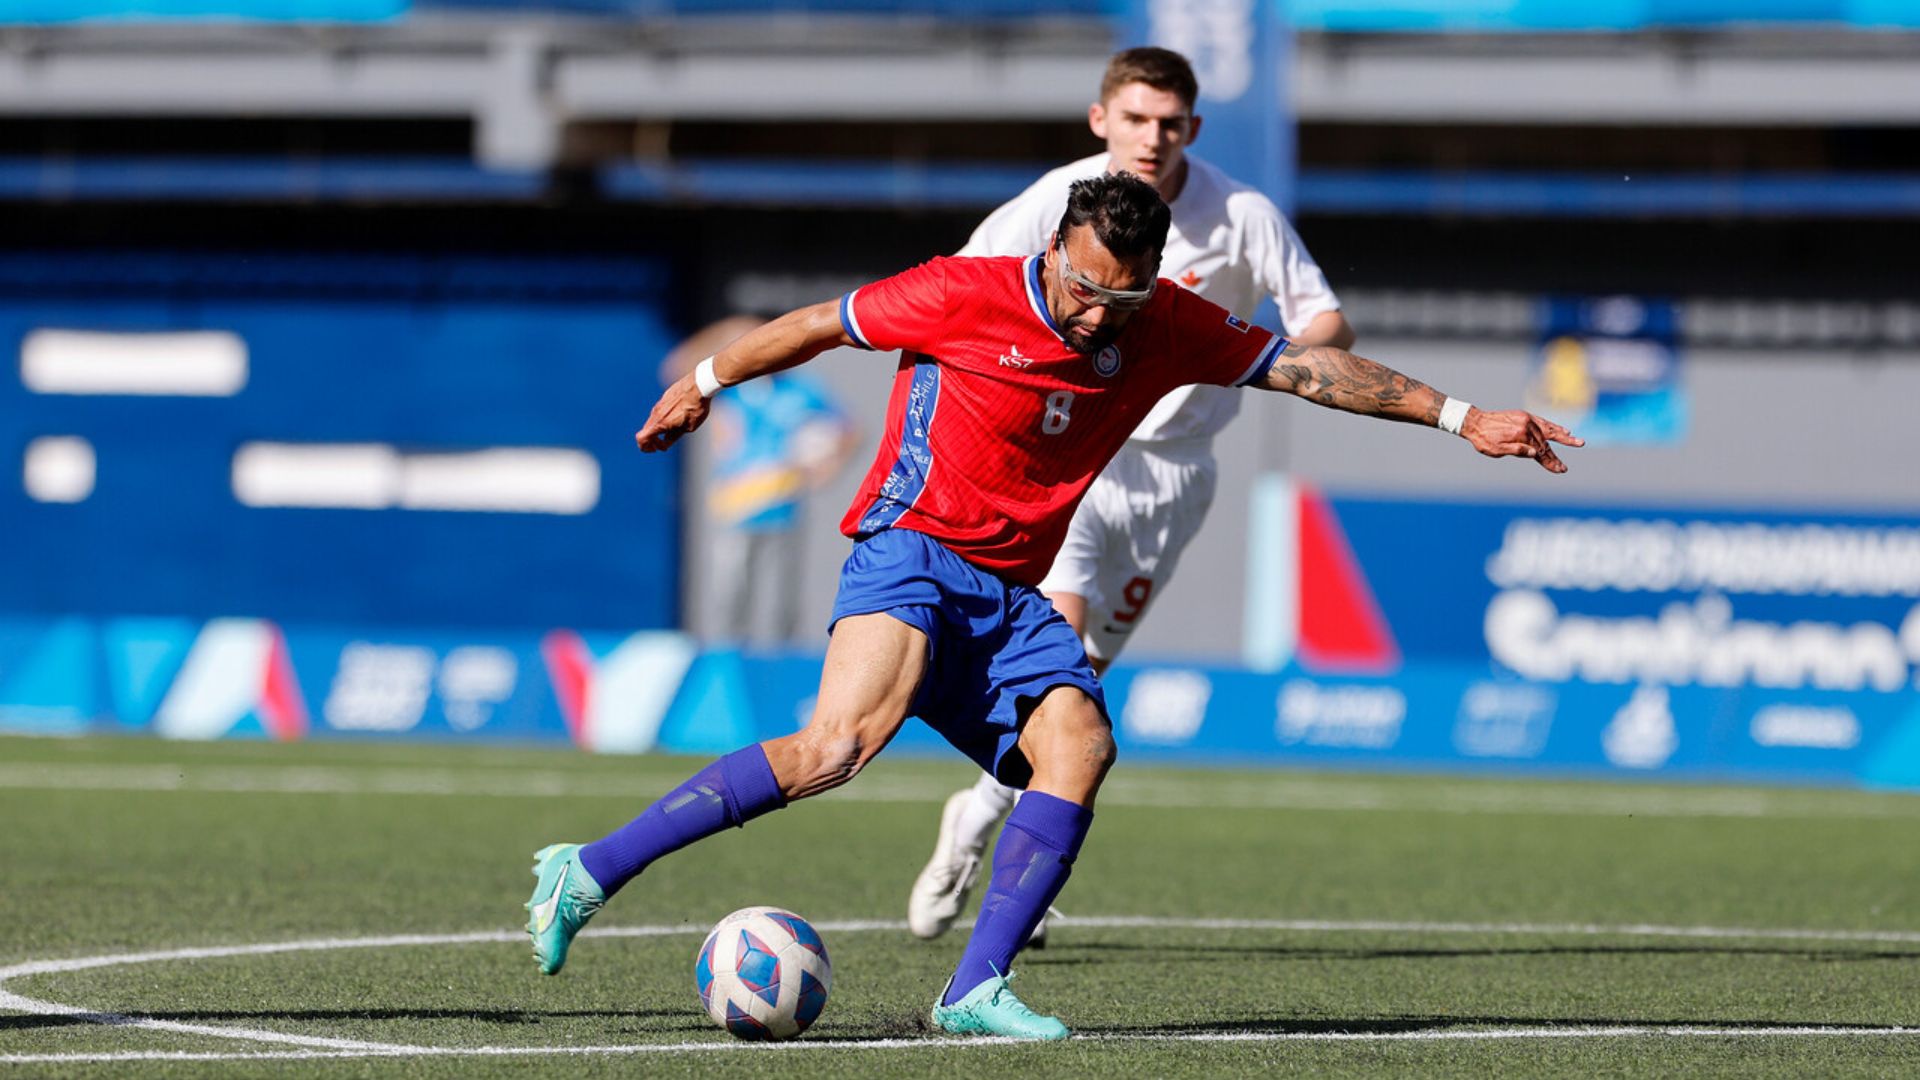 Chile Achieves Its First Victory in CP Football